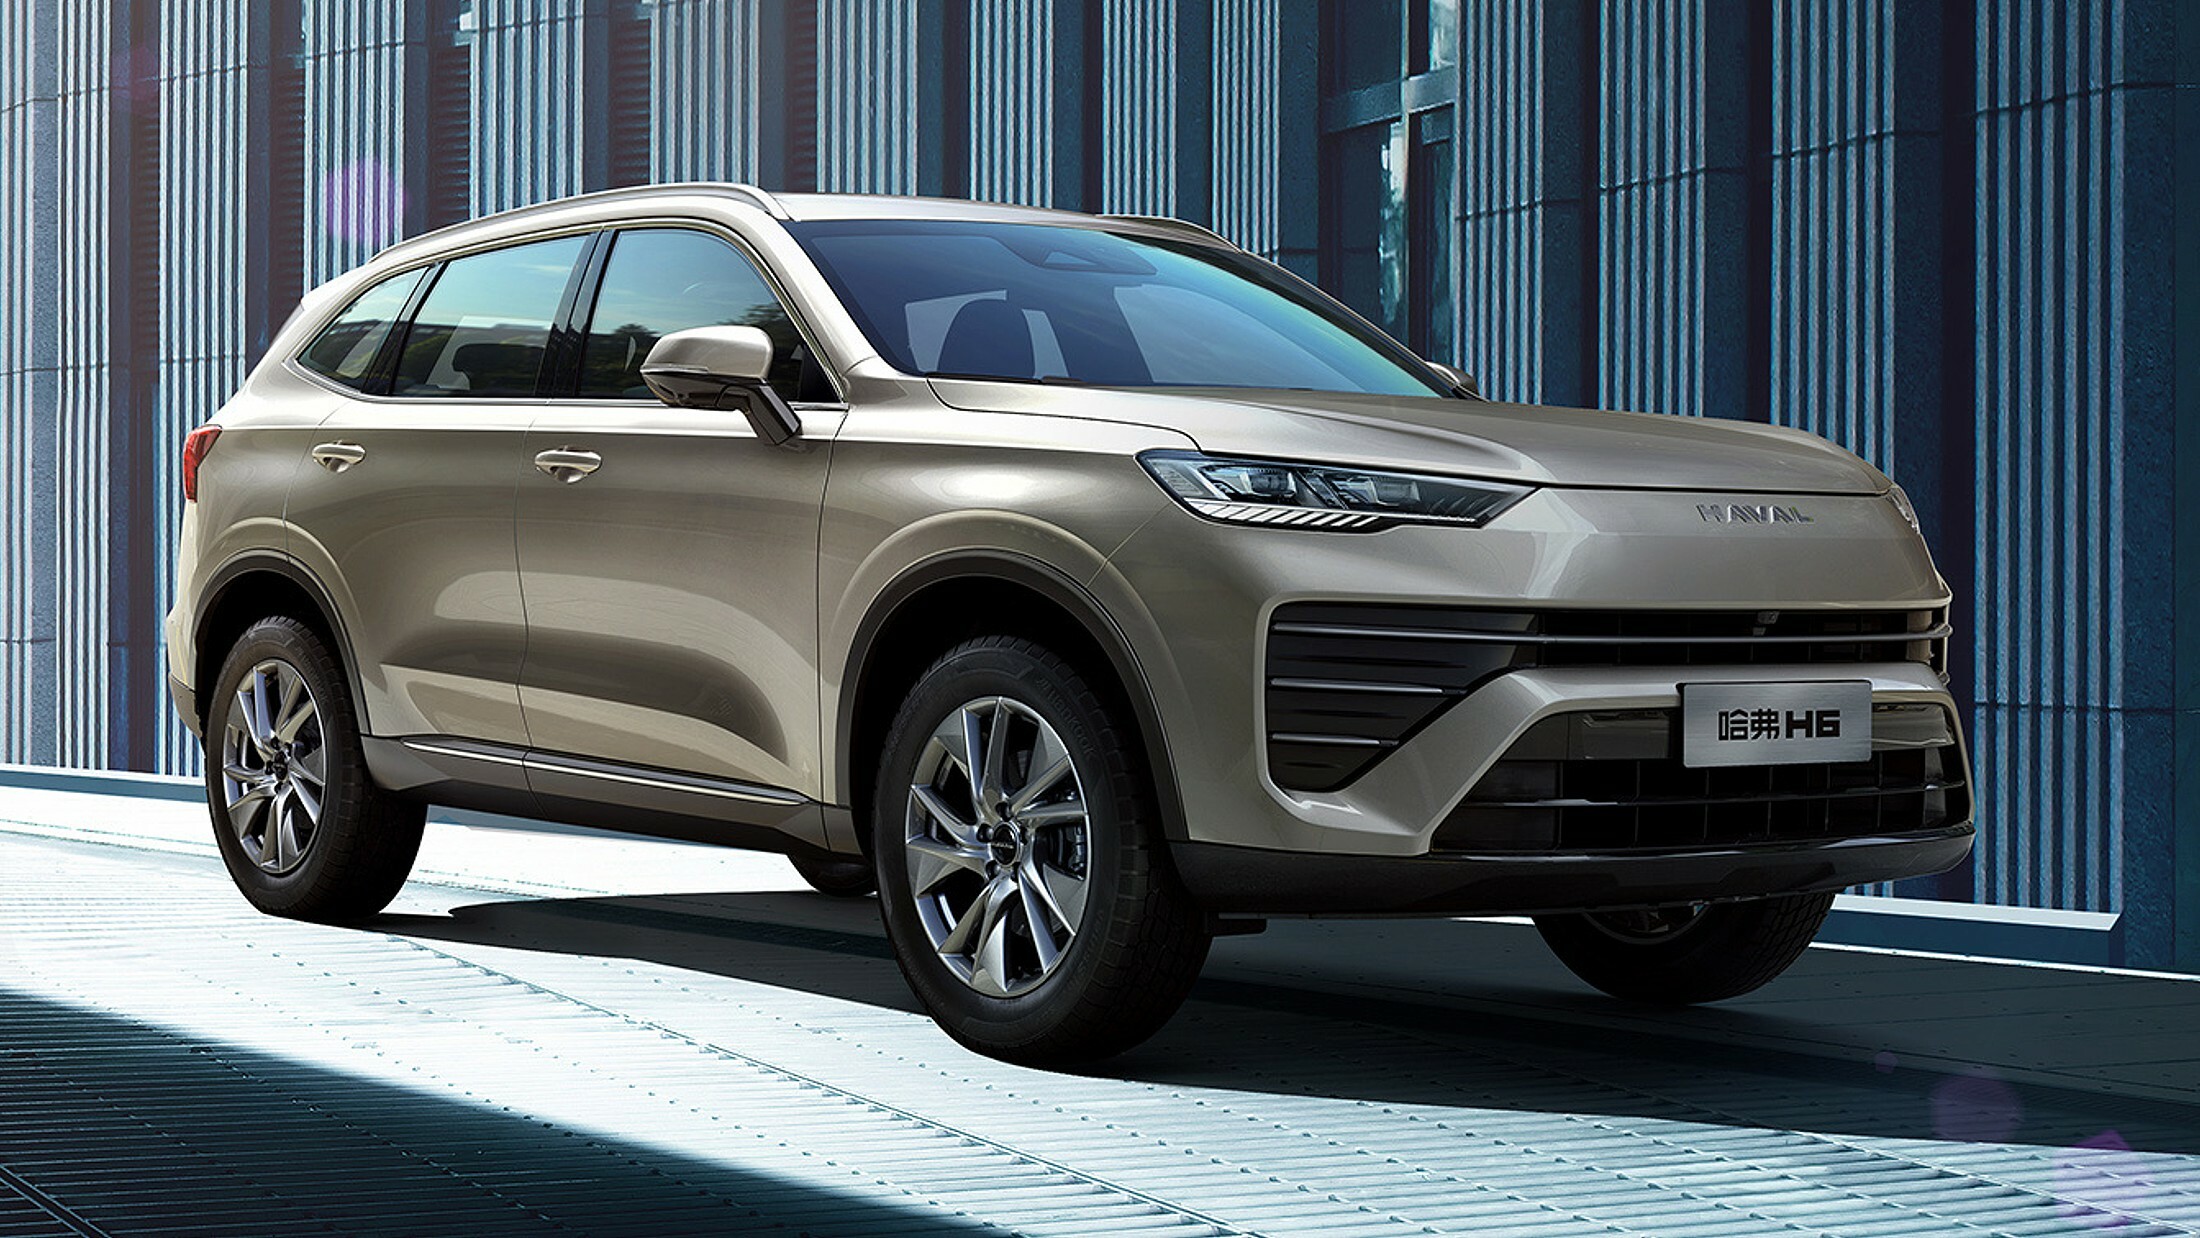 Haval's Facelifted H6 Is A Hippo-Faced SUV From China